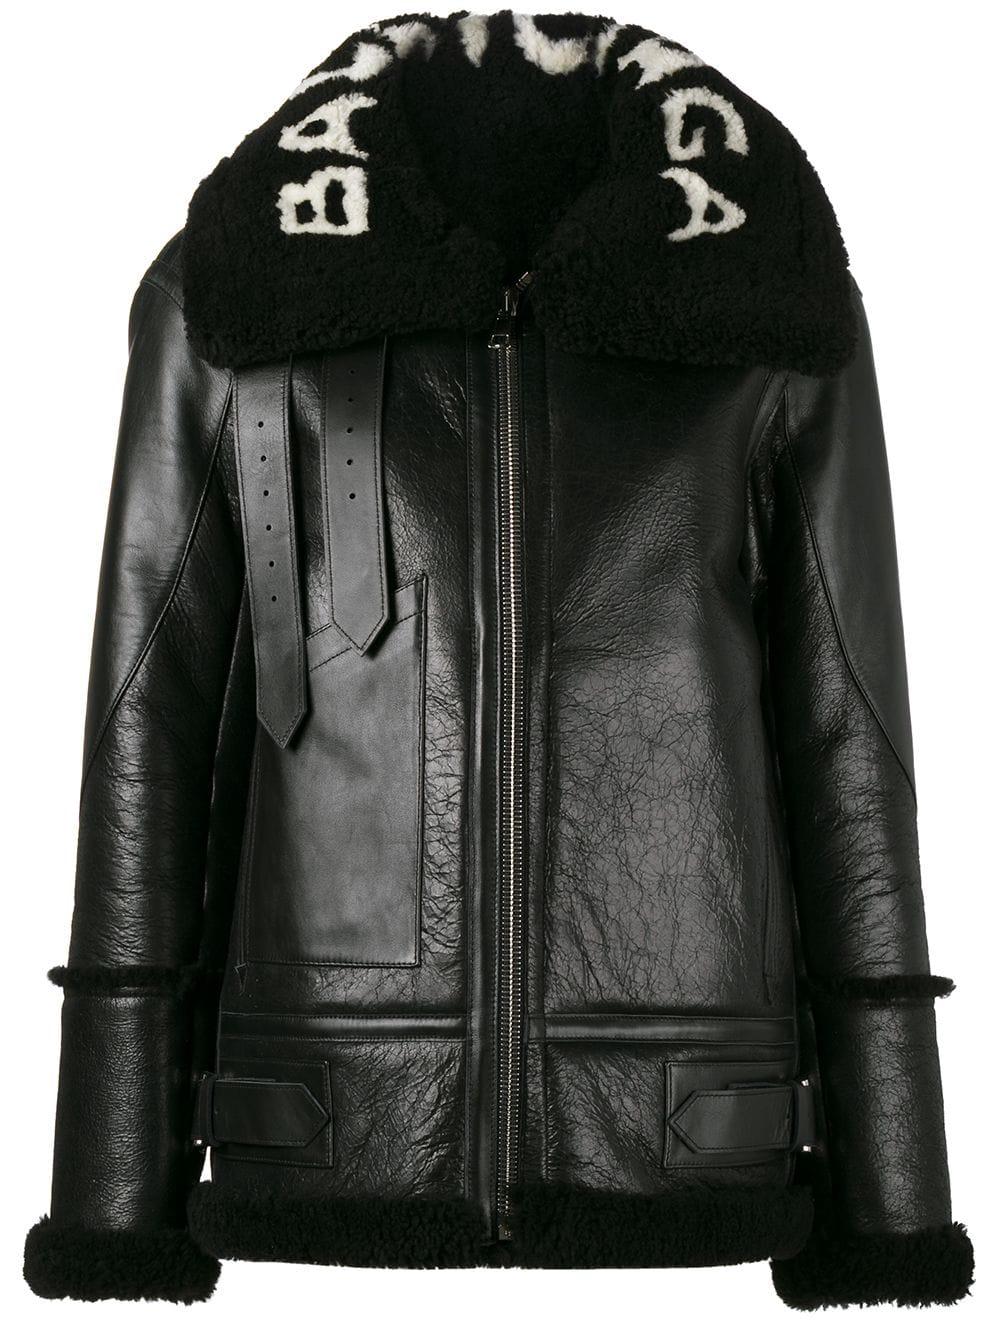 Balenciaga Leather Oversized Le Bombardier Shearling Jacket in Black - Lyst